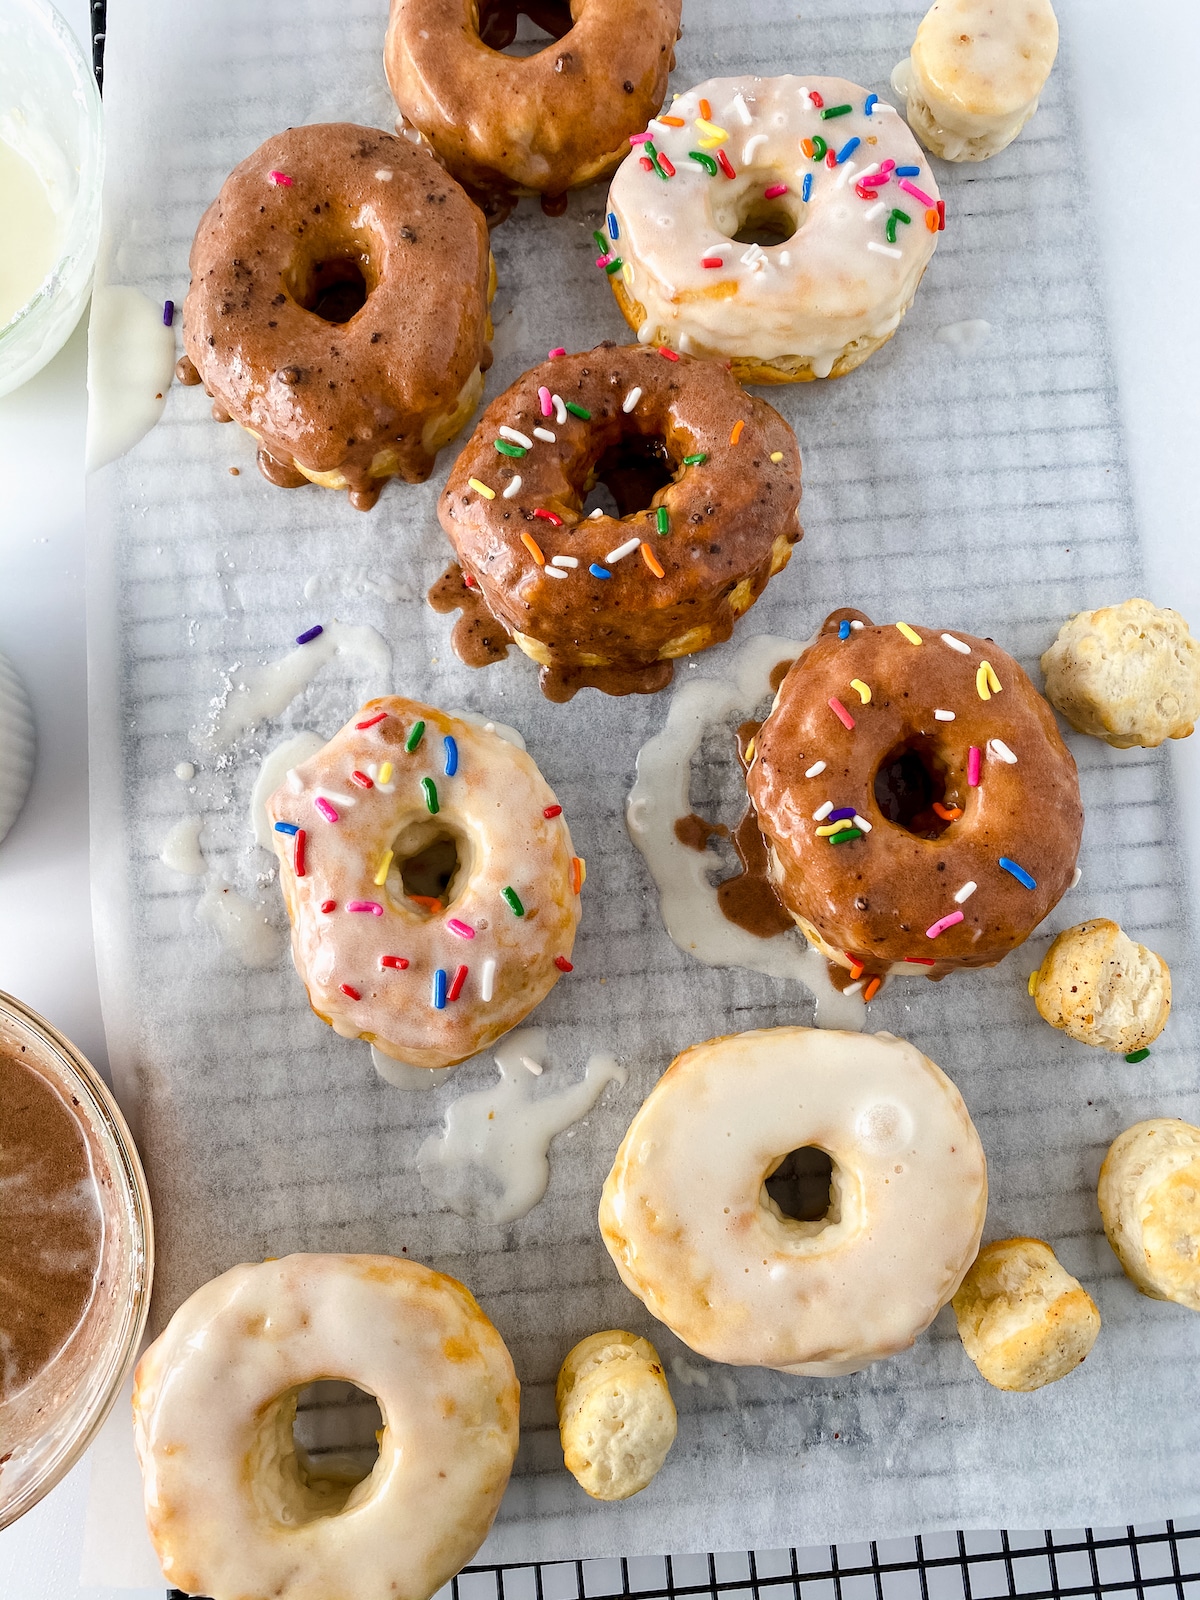 Dipping donuts in glaze